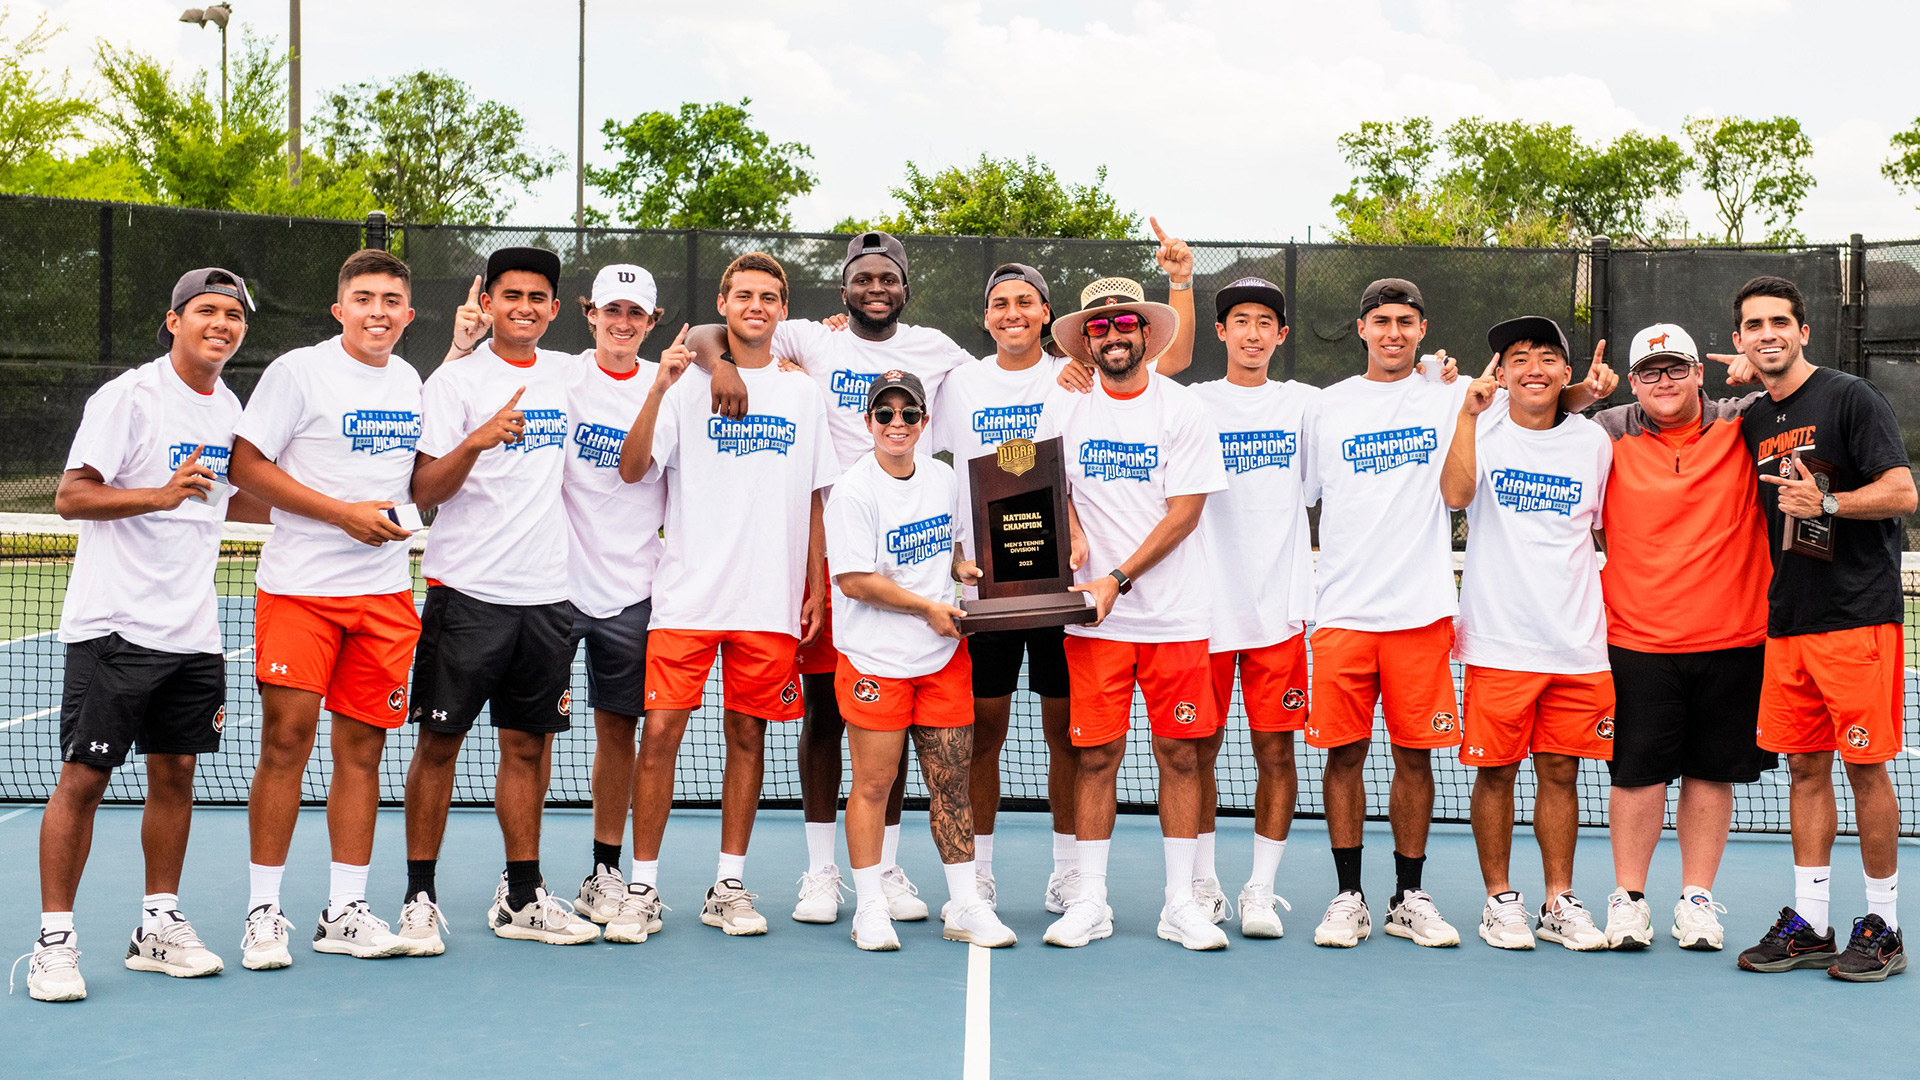 National Champs!! Tiger tennis team brings home first title since 1991